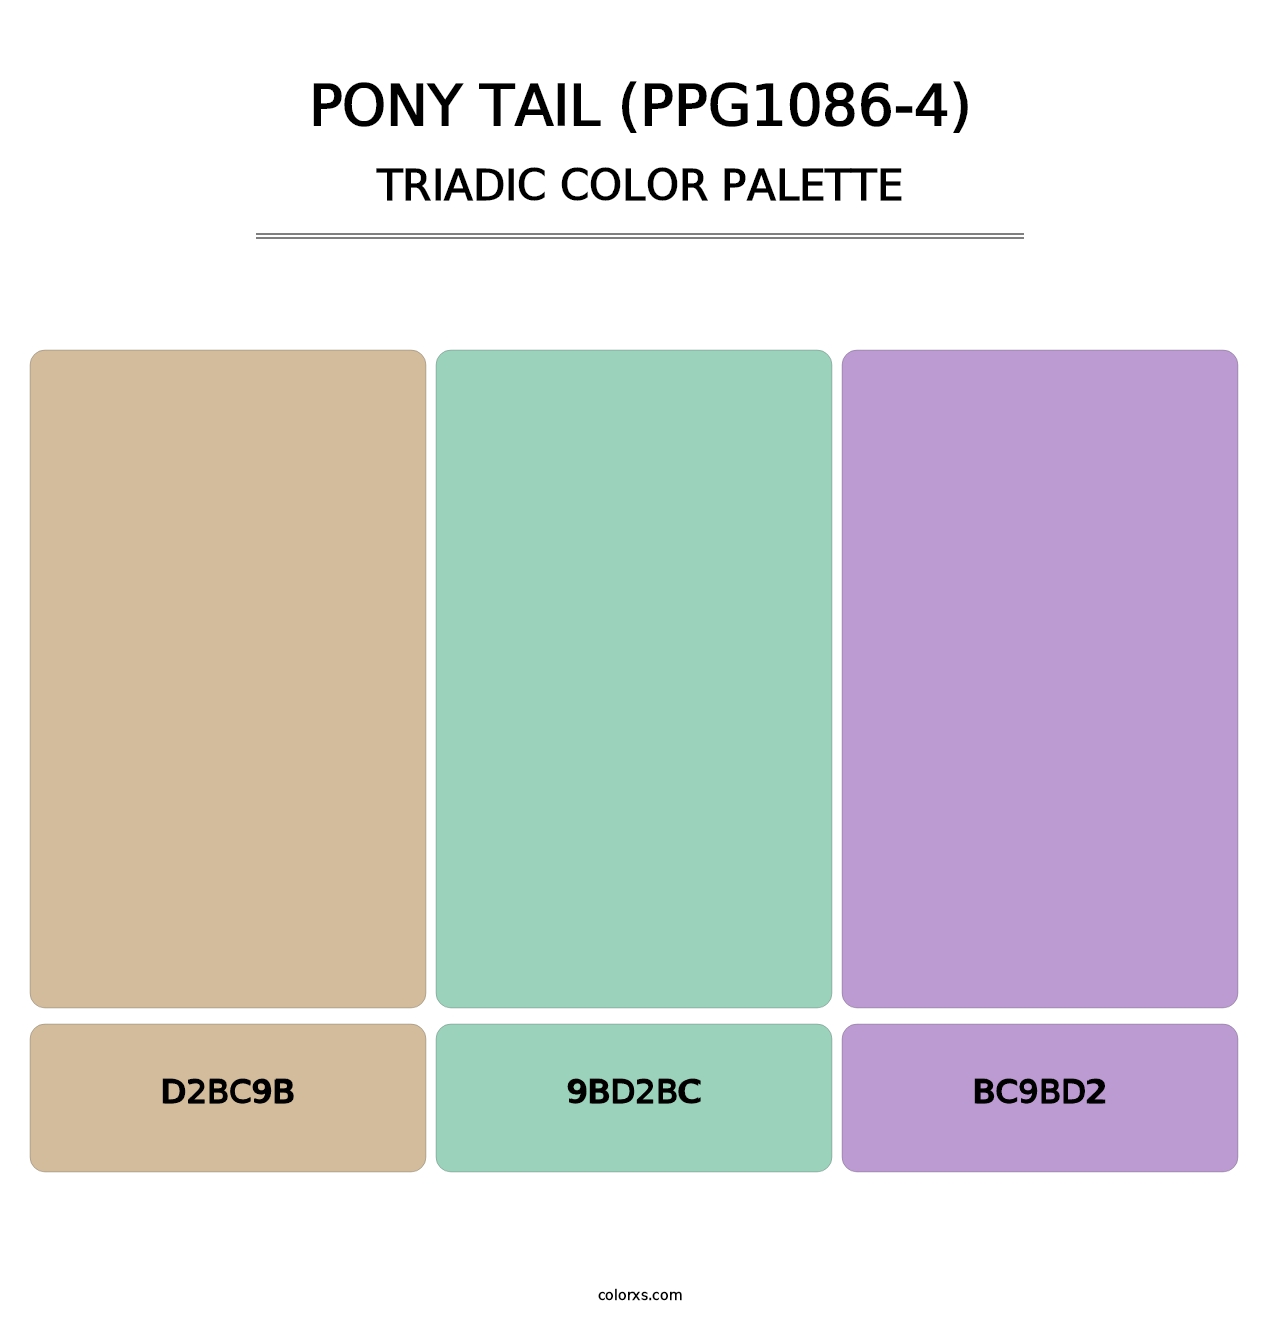 Pony Tail (PPG1086-4) - Triadic Color Palette